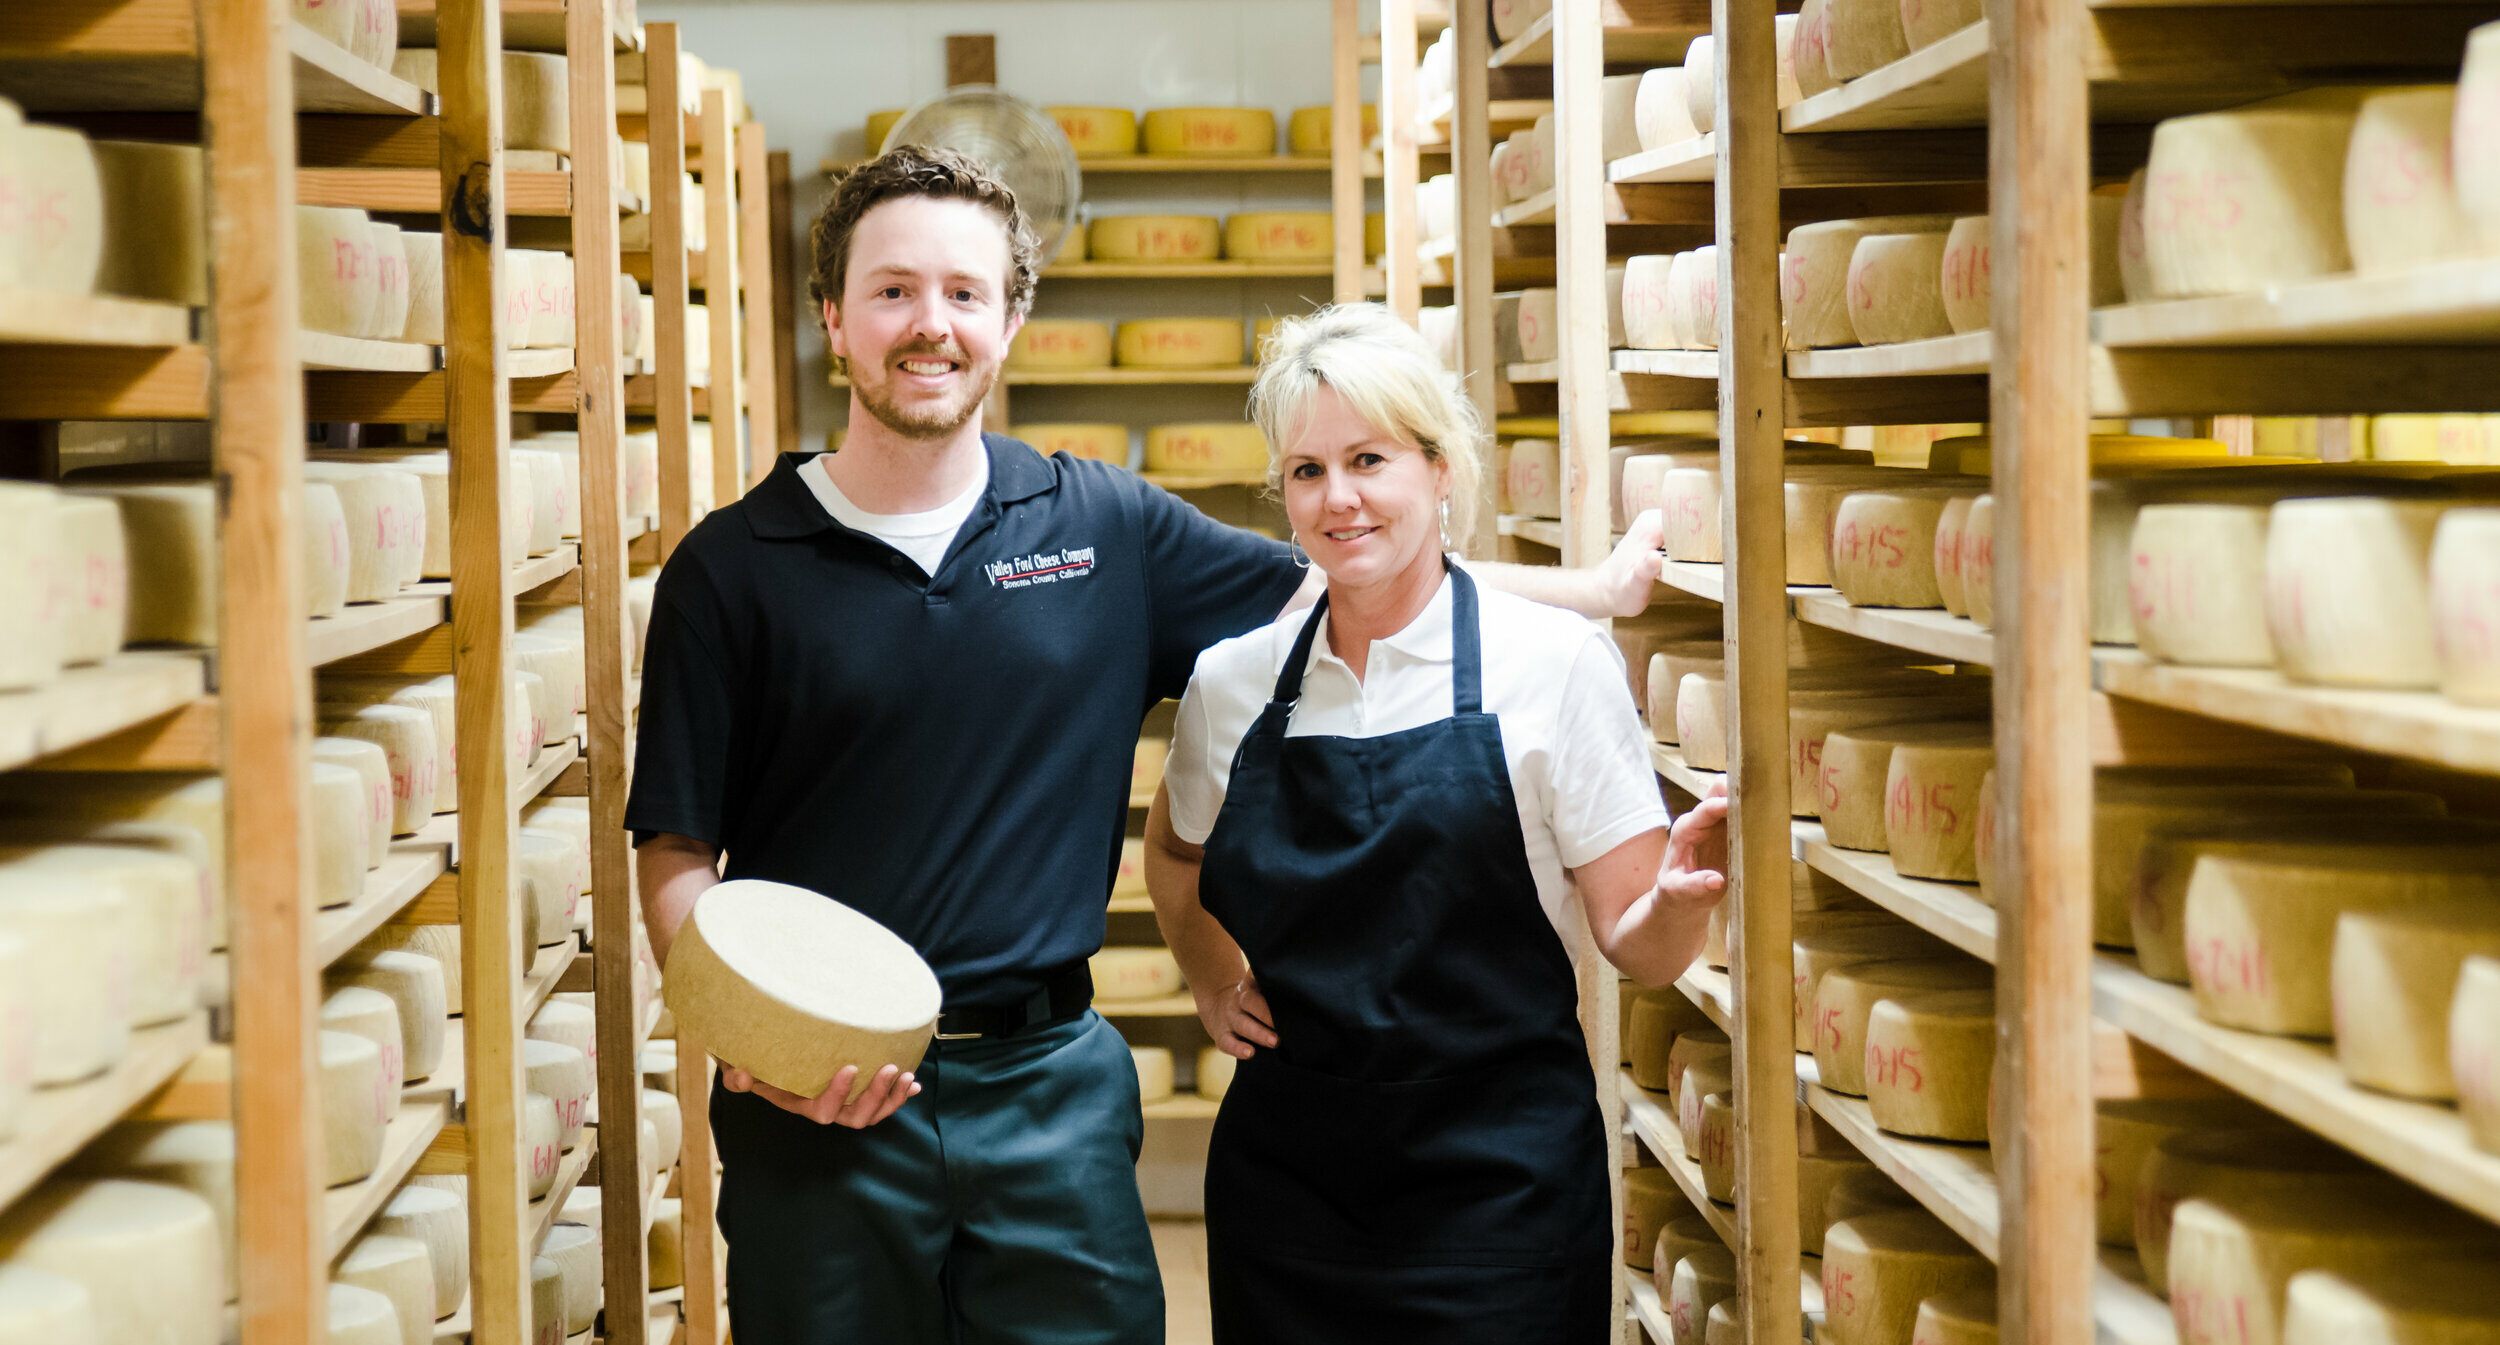 Filled cheese cellar and two people holding a wheel of cheese